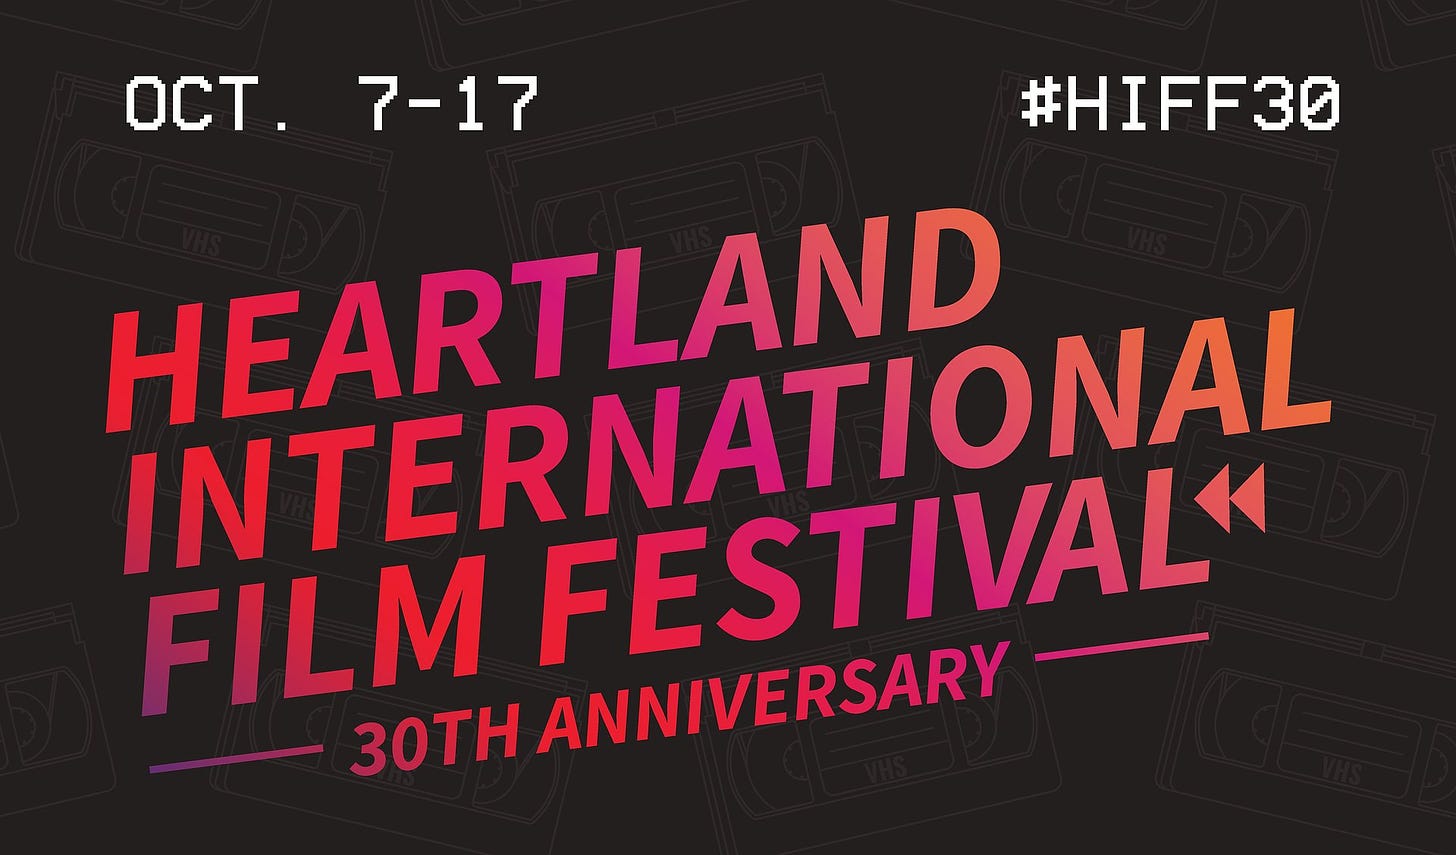 HEARTLAND INTERNATIONAL FILM FESTIVAL ANNOUNCES FULL LINEUP FOR 30TH ANNIVERSARY, NEW EVENT TITLES INCLUDE ANNIVERSARY GALA ADVANCE SCREENING OF “KING RICHARD” IN ADDITION TO “C’MON C’MON,” “SPENCER,” “THE FRENCH DISPATCH,” “THE POWER OF THE DOG,” “BELFAST,” AND “THE HAND OF GOD”